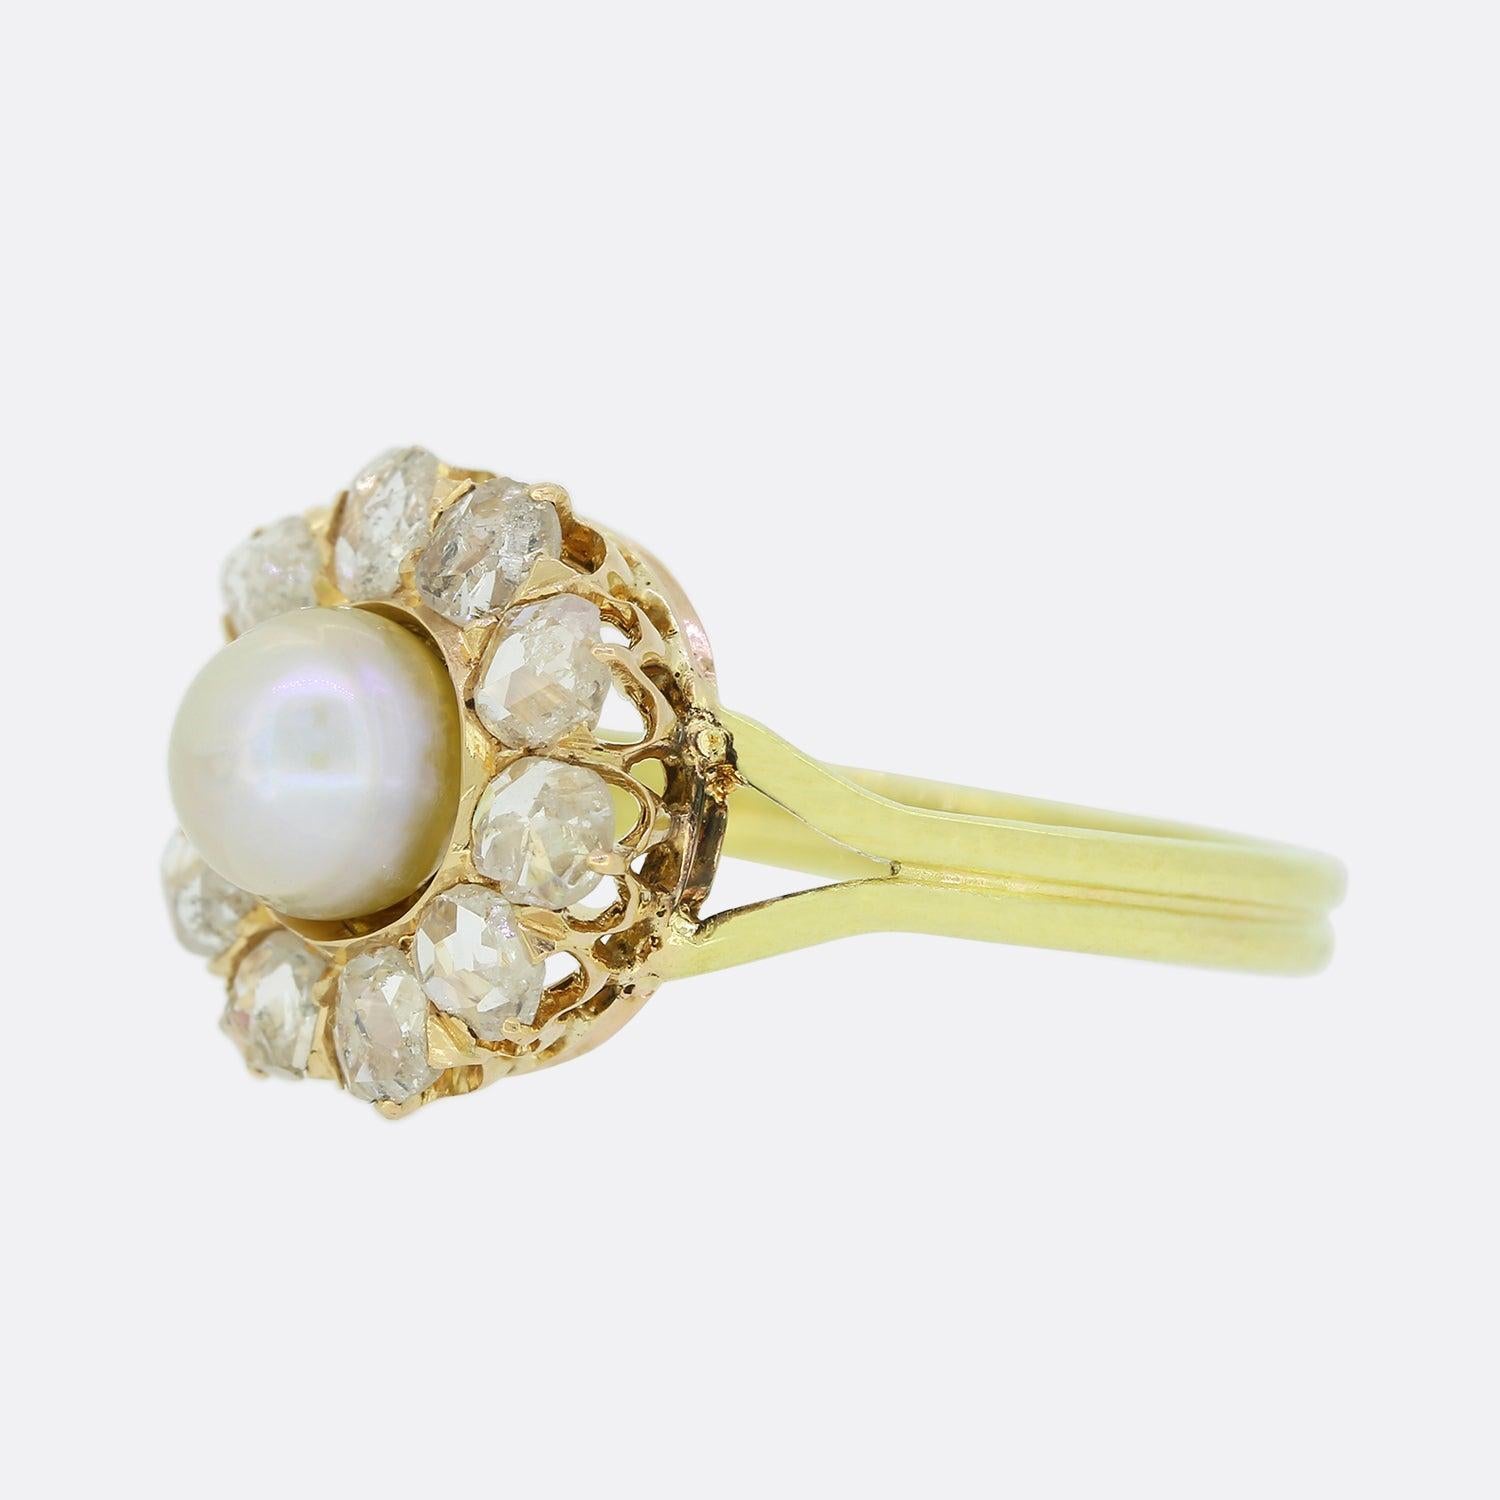 This is a superb 18ct gold pearl and diamond cluster ring. Set upon a rose gold head, the central natural pearl possesses a wonderful lustre whilst the encompassing stones which circulate the outer edge are bright white sparkling rose cuts diamonds.